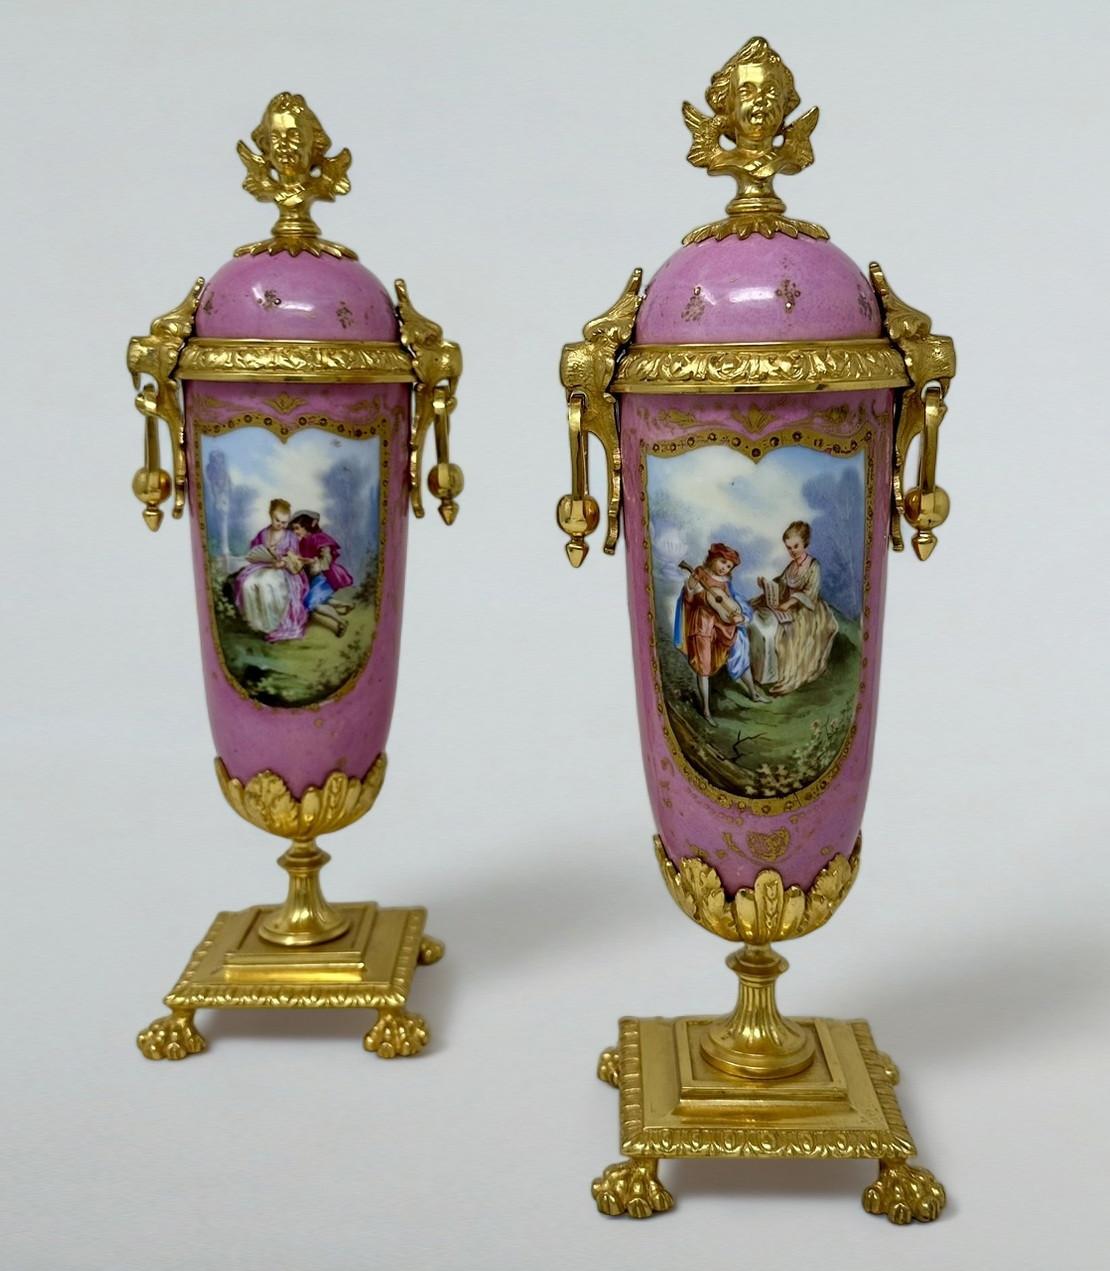 Stunning Pair of French Sevres Soft Paste Enameled Porcelain and Ormolu Twin Handle Table or Mantle Urns of traditional urn form and of outstanding quality, and good size proportions, each raised on a square stepped base with claw feet. Mid